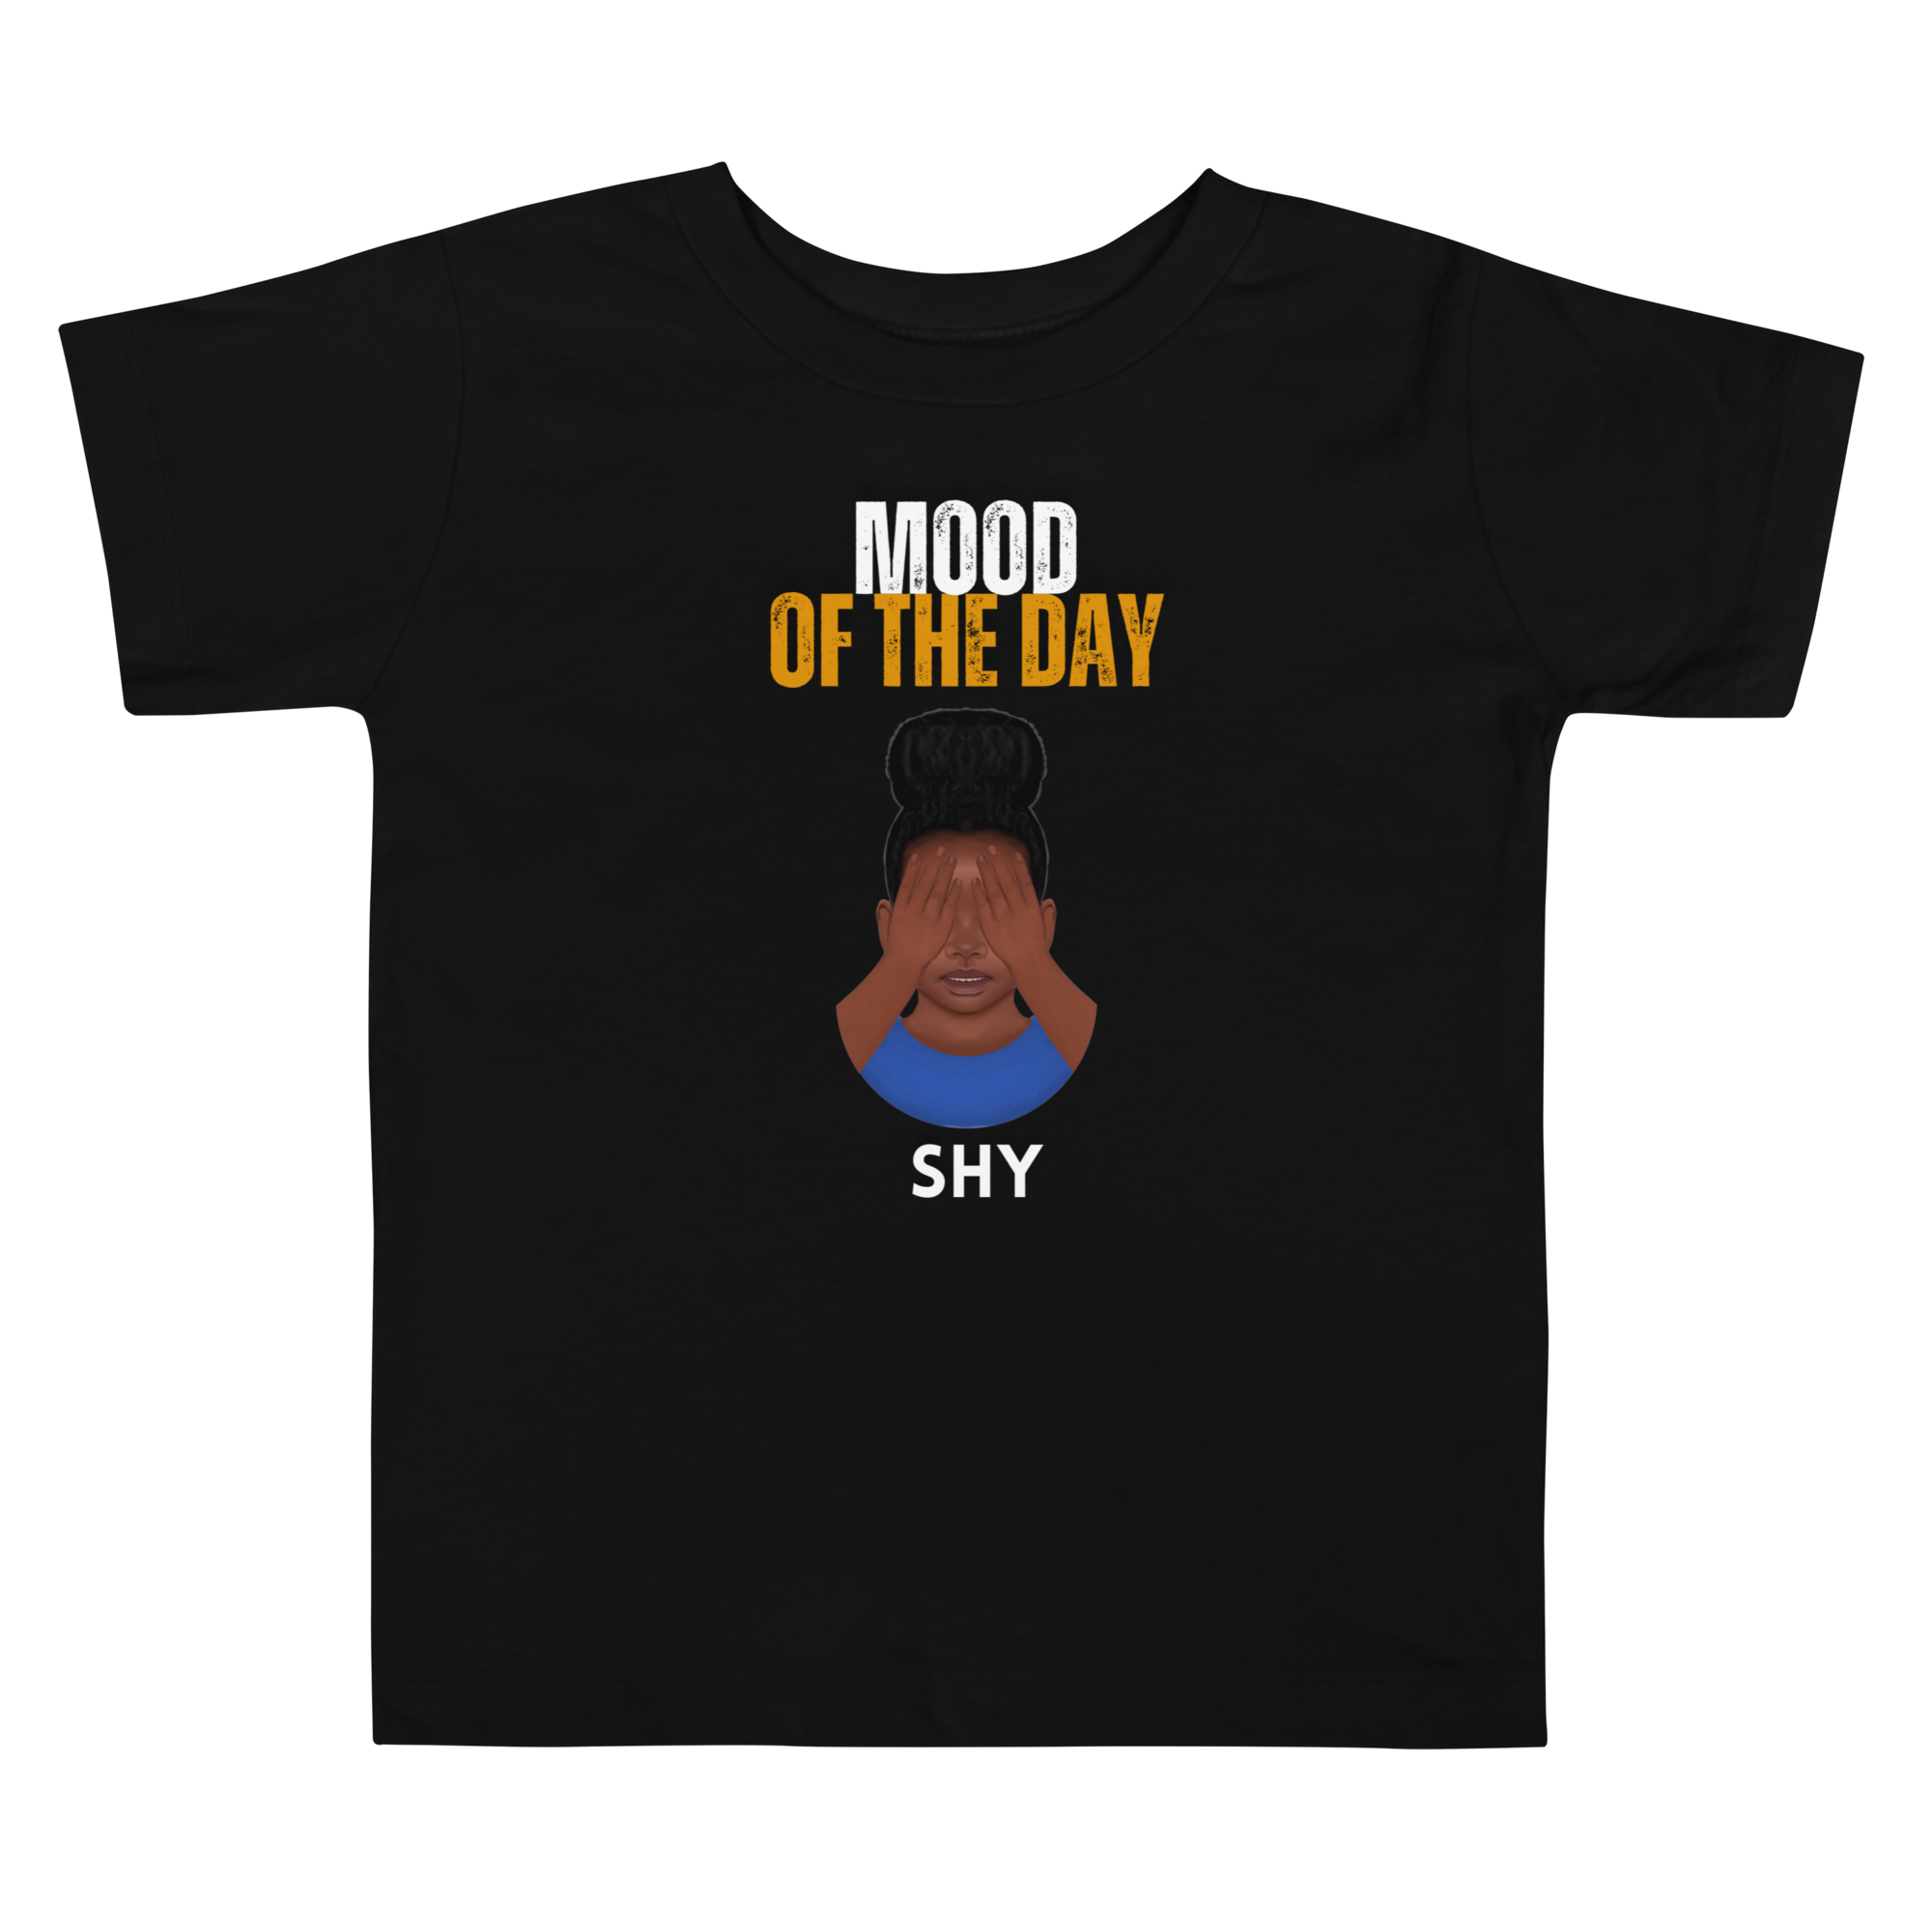 Toddler Mood of the Day T-shirt - Shy Girl